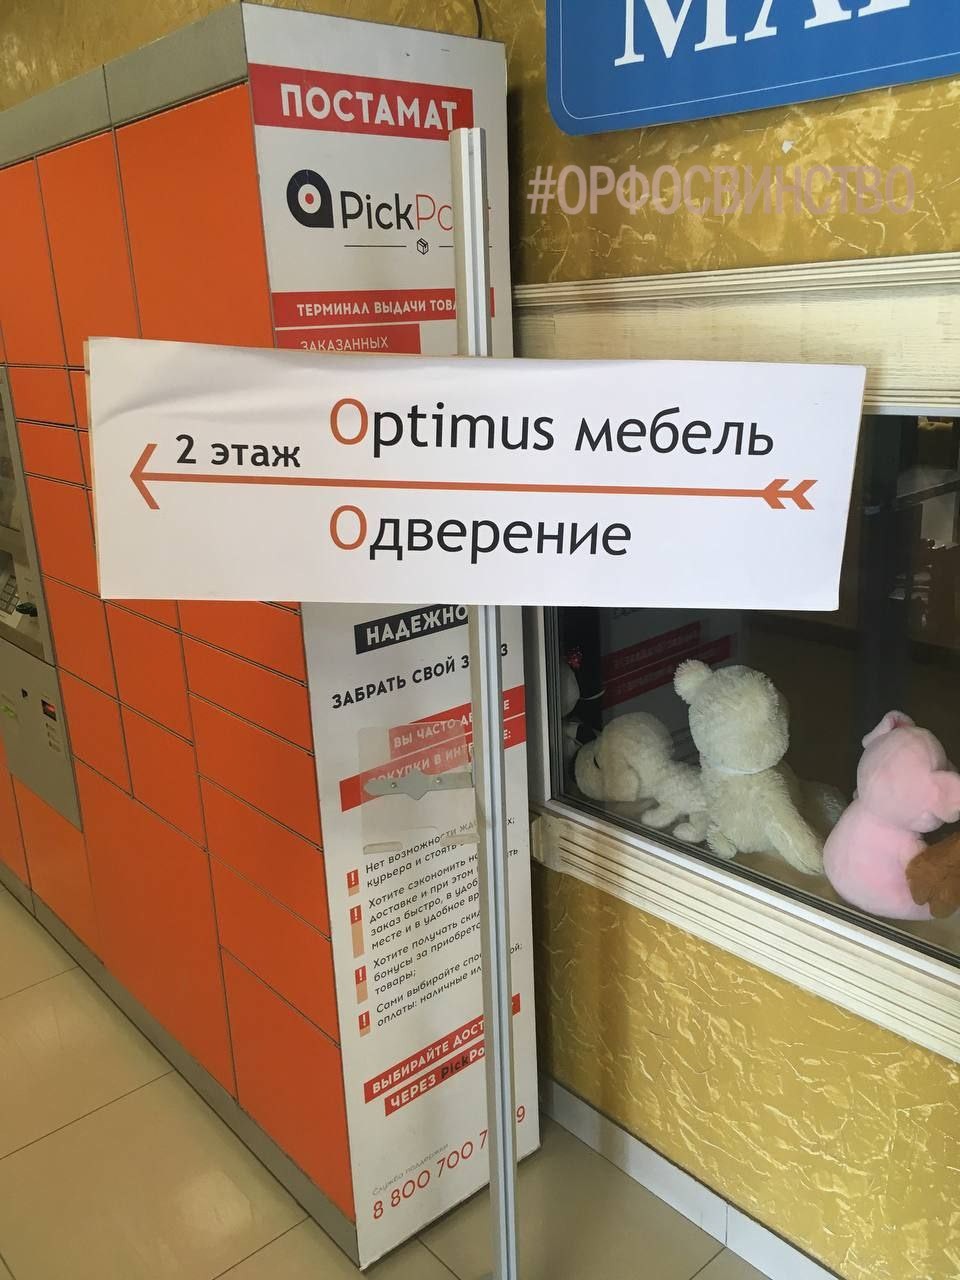 Completely screwed up, right? - Marketing, Advertising, Russian language